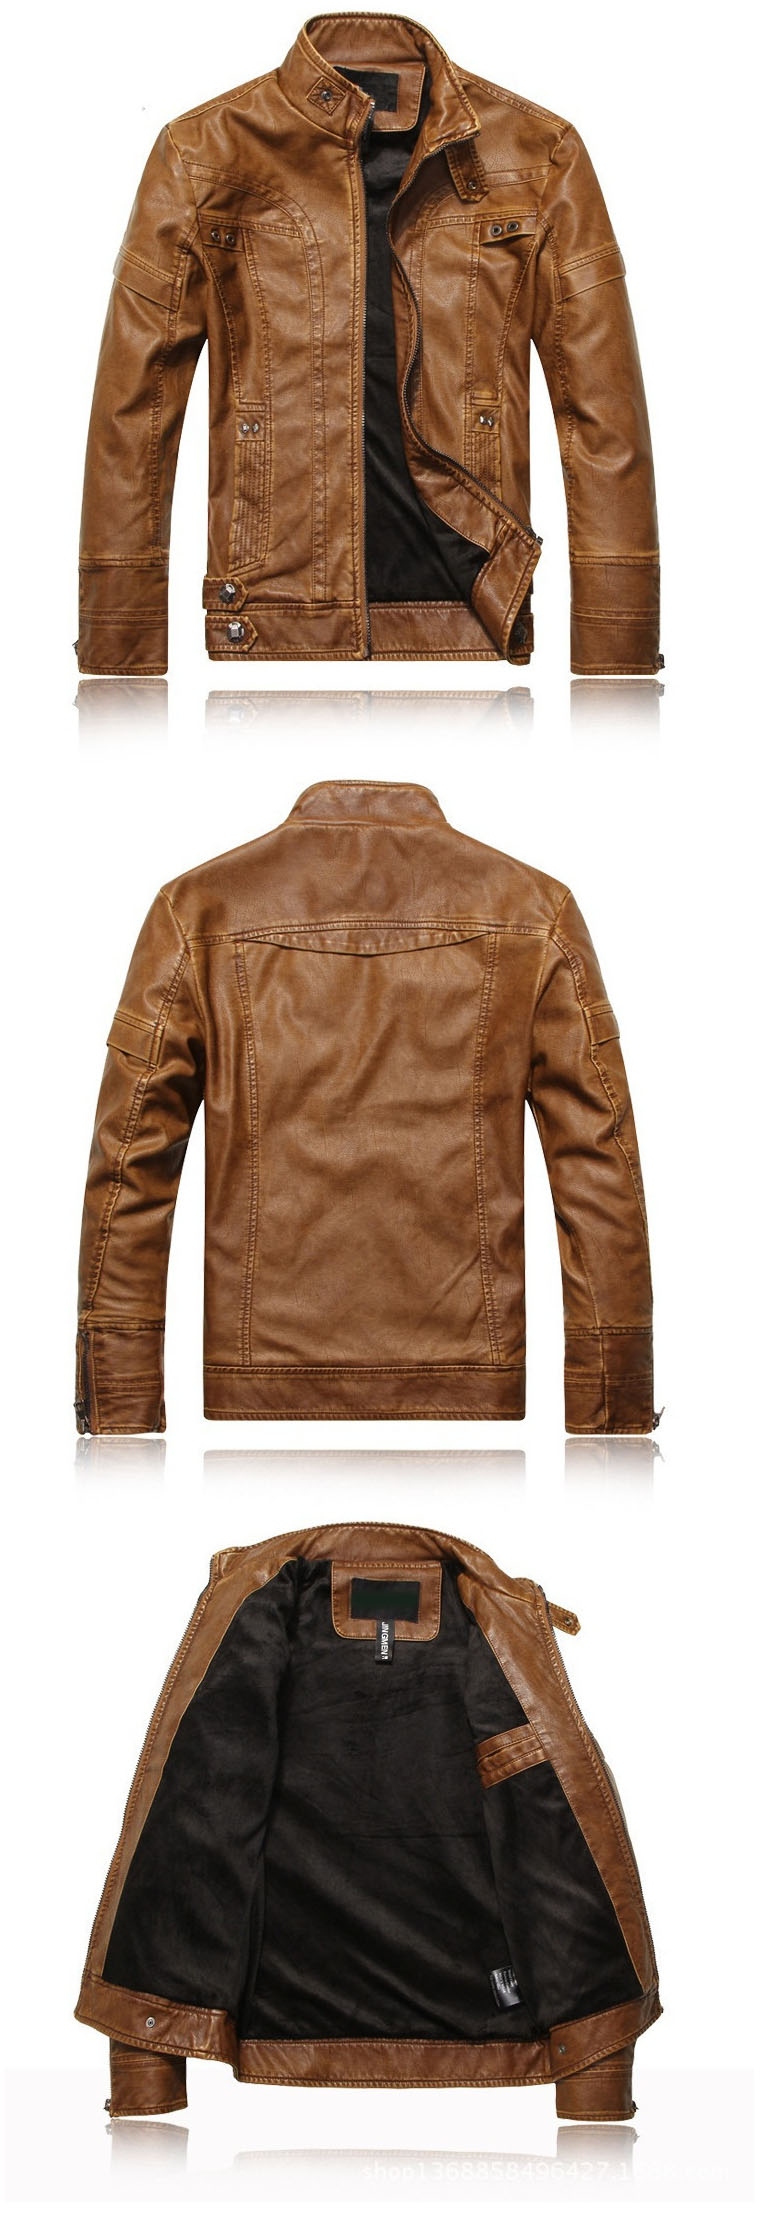 New-arrive-brand-motorcycle-leather-jacket-men-mens-leather-jackets-jaqueta-de-couro-masculina-mens--32277693756